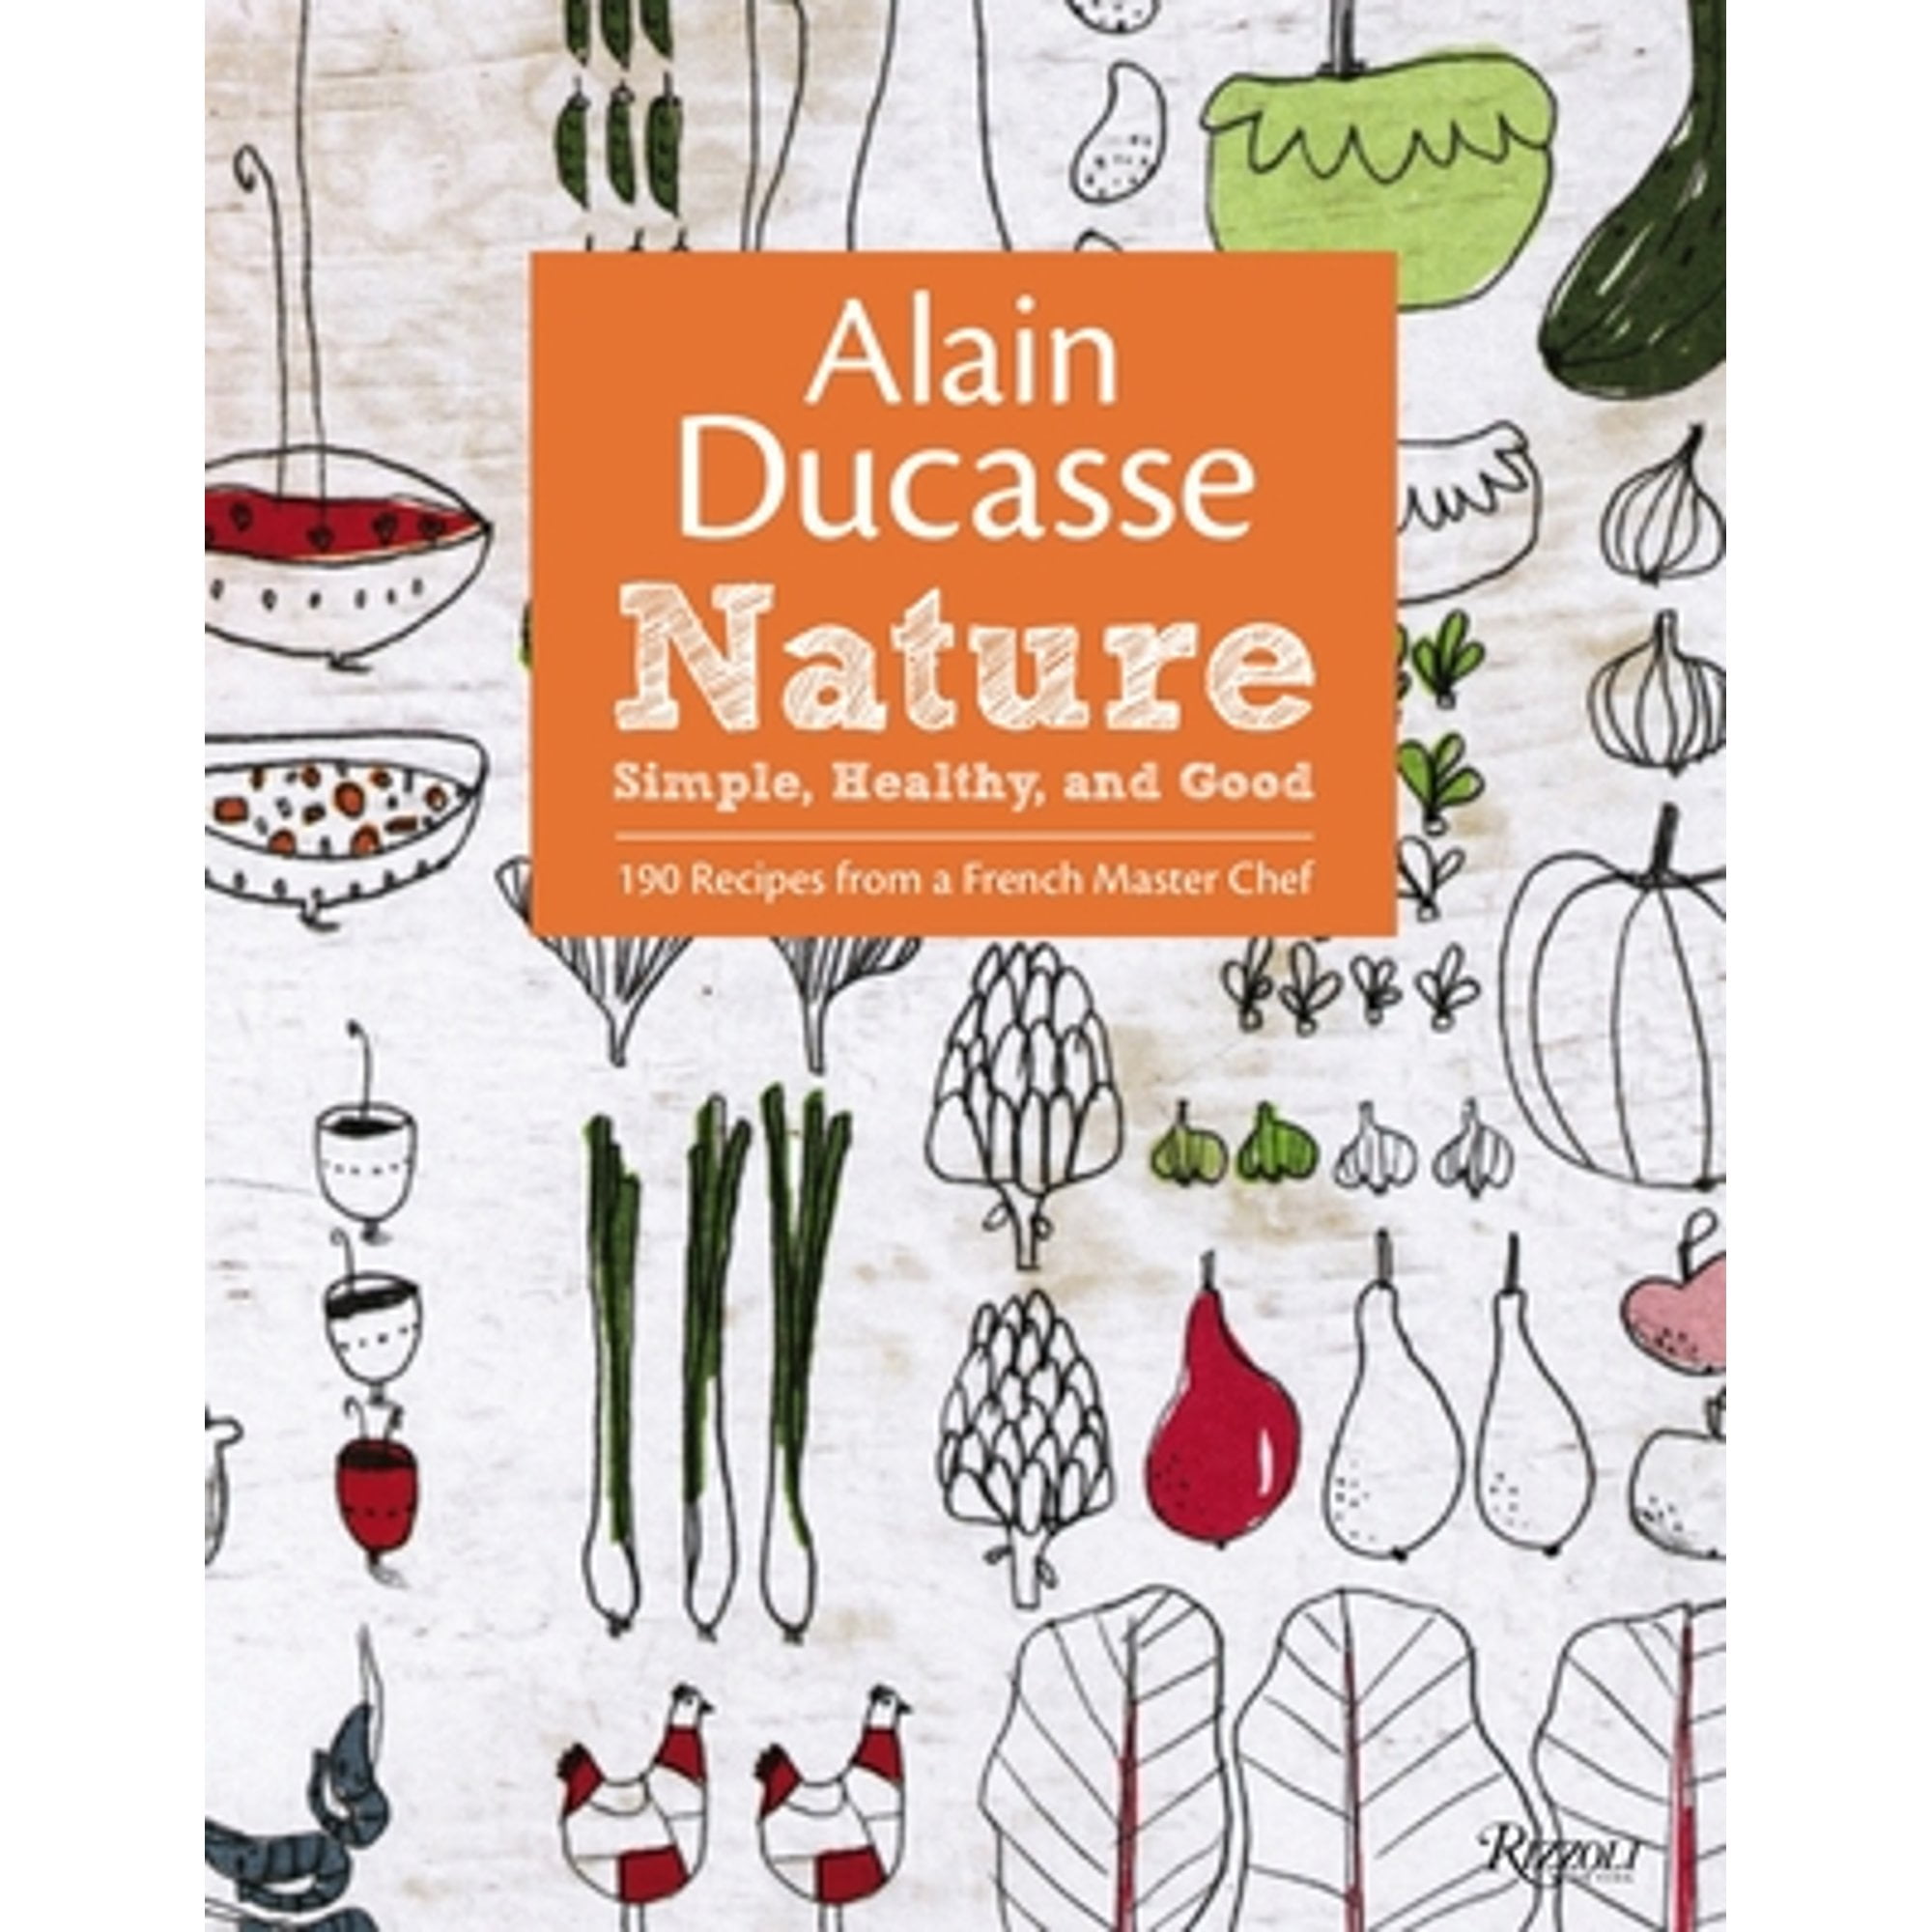 Pre-Owned Alain Ducasse Nature: Simple, Healthy, and Good (Hardcover 9780847838400) by Alain Ducasse, Paula Neyrat, Christophe Saintagne